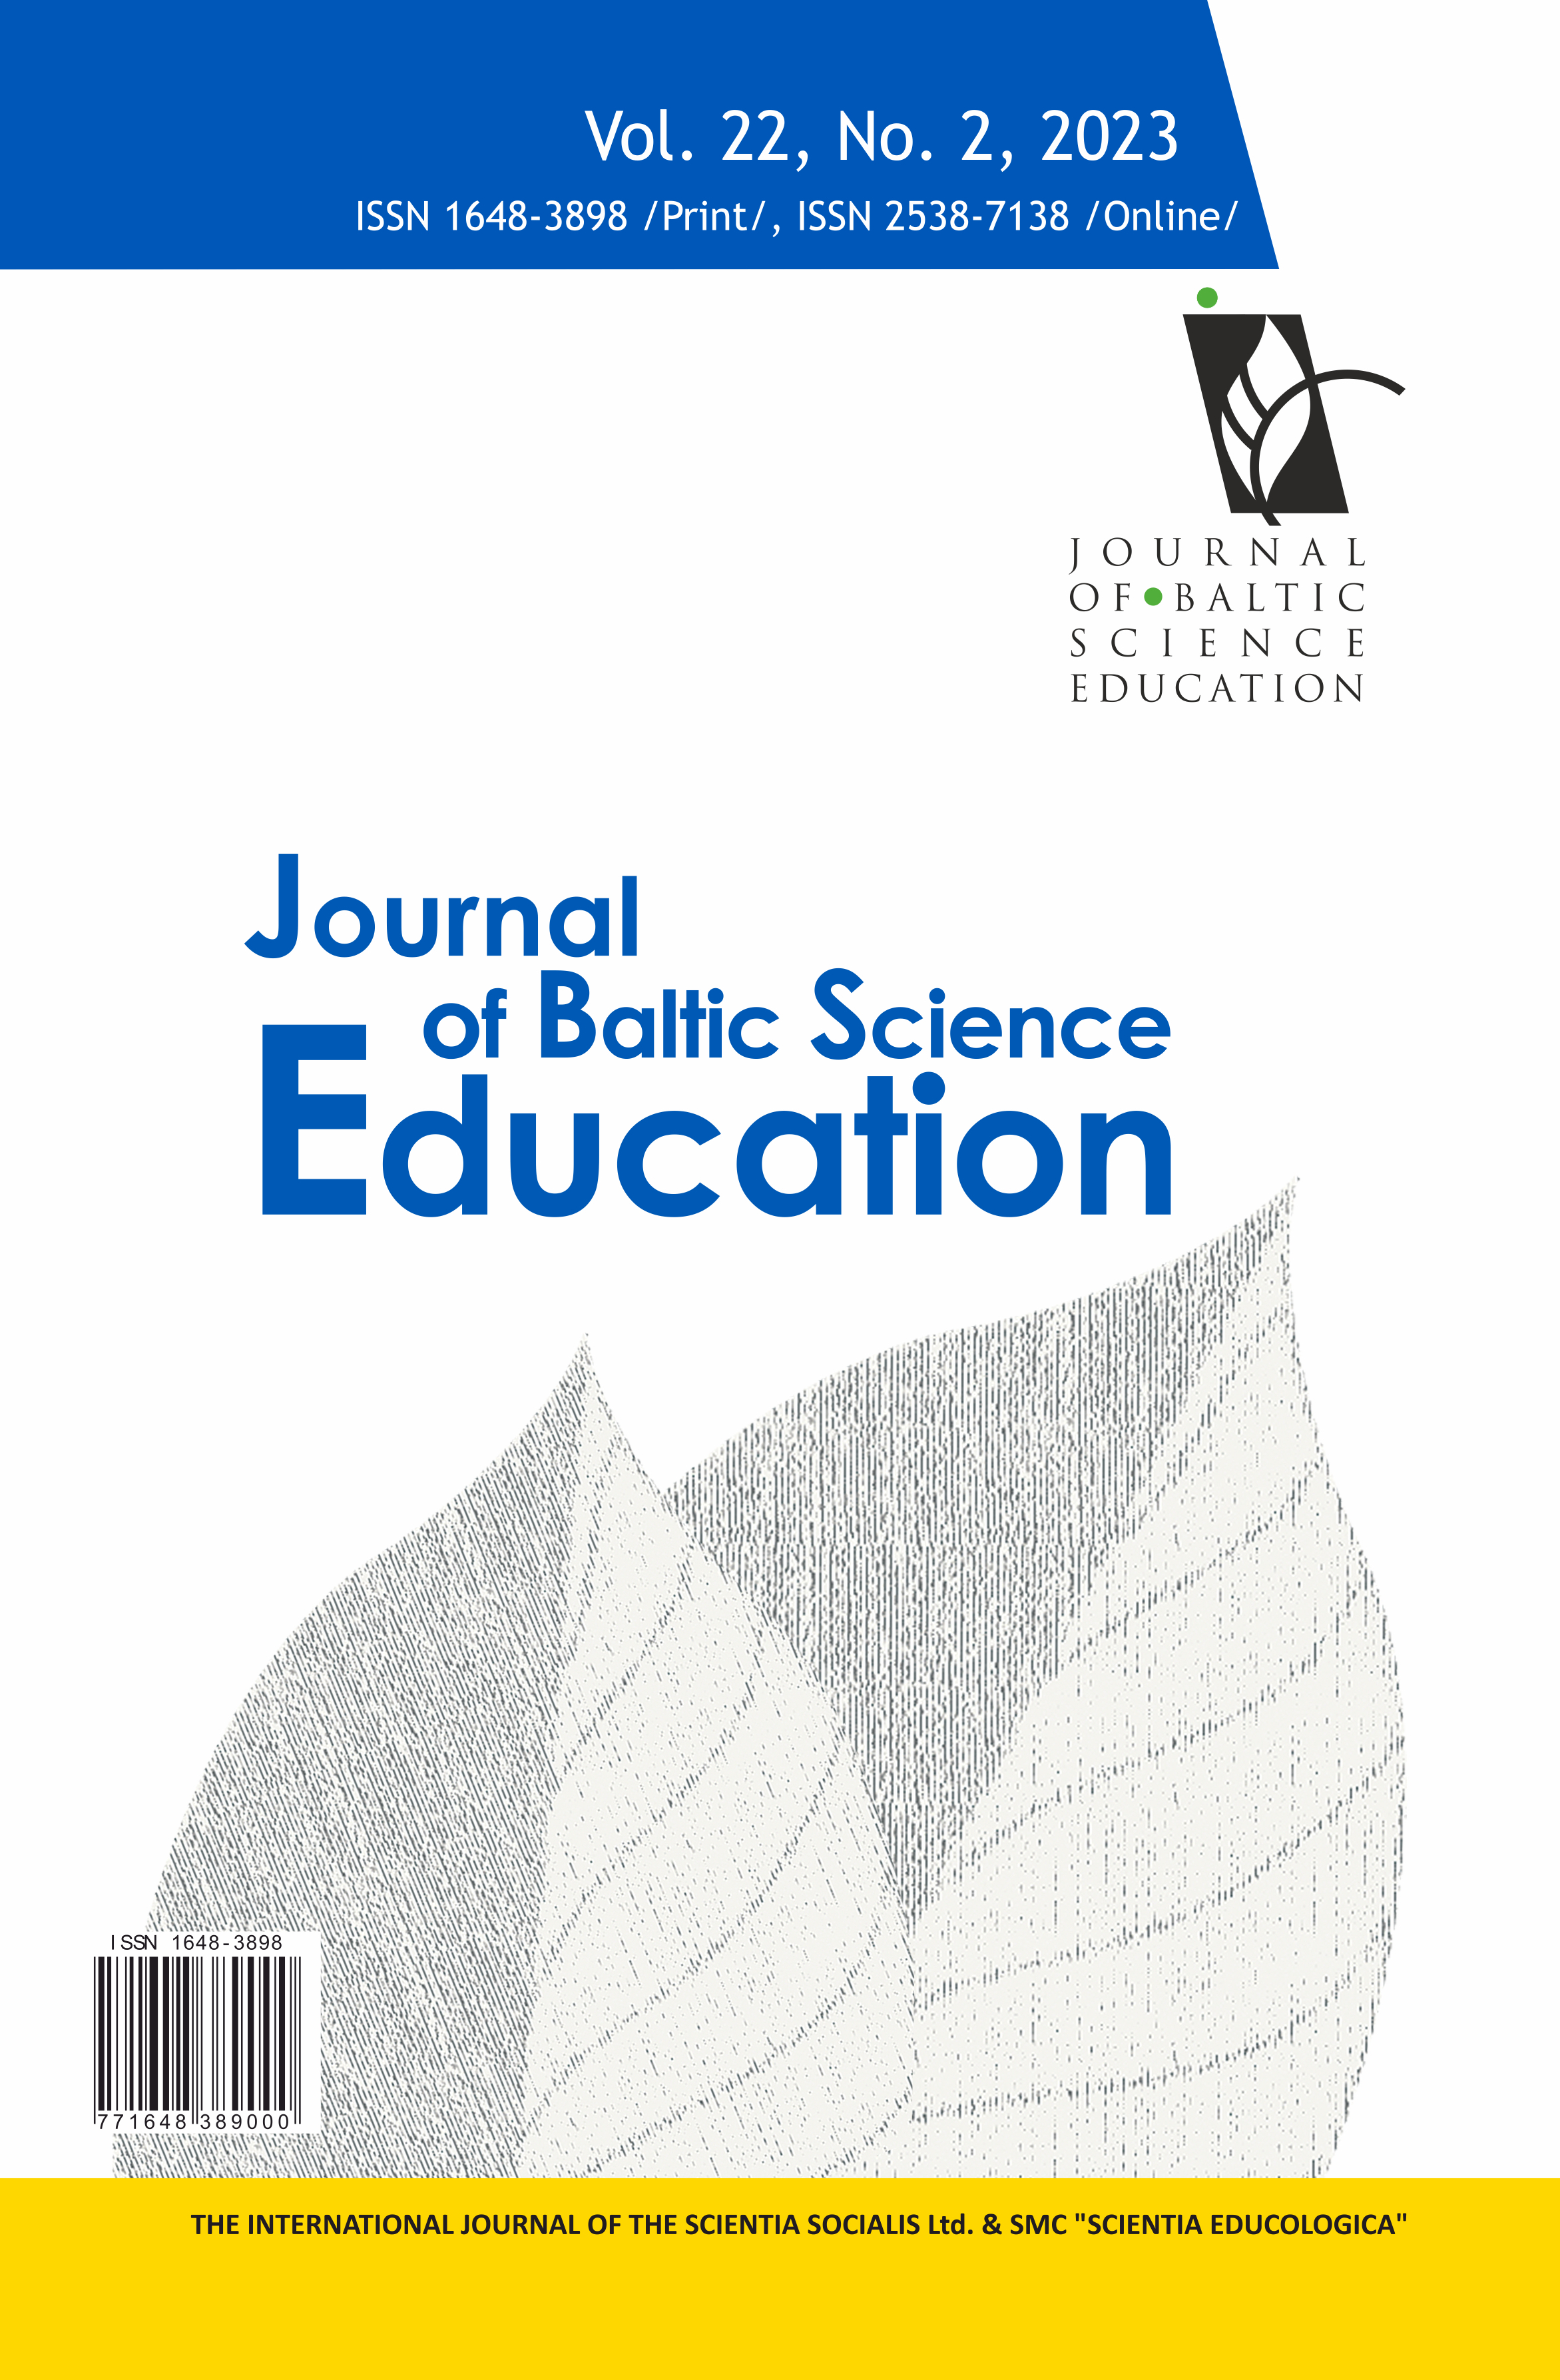 SECONDARY SCHOOL STUDENTS’ PERCEPTIONS OF SCIENCE LEARNING ENVIRONMENT AND SELF-EFFICACY IN SOUTH KOREA: GENDER DIFFERENCES Cover Image